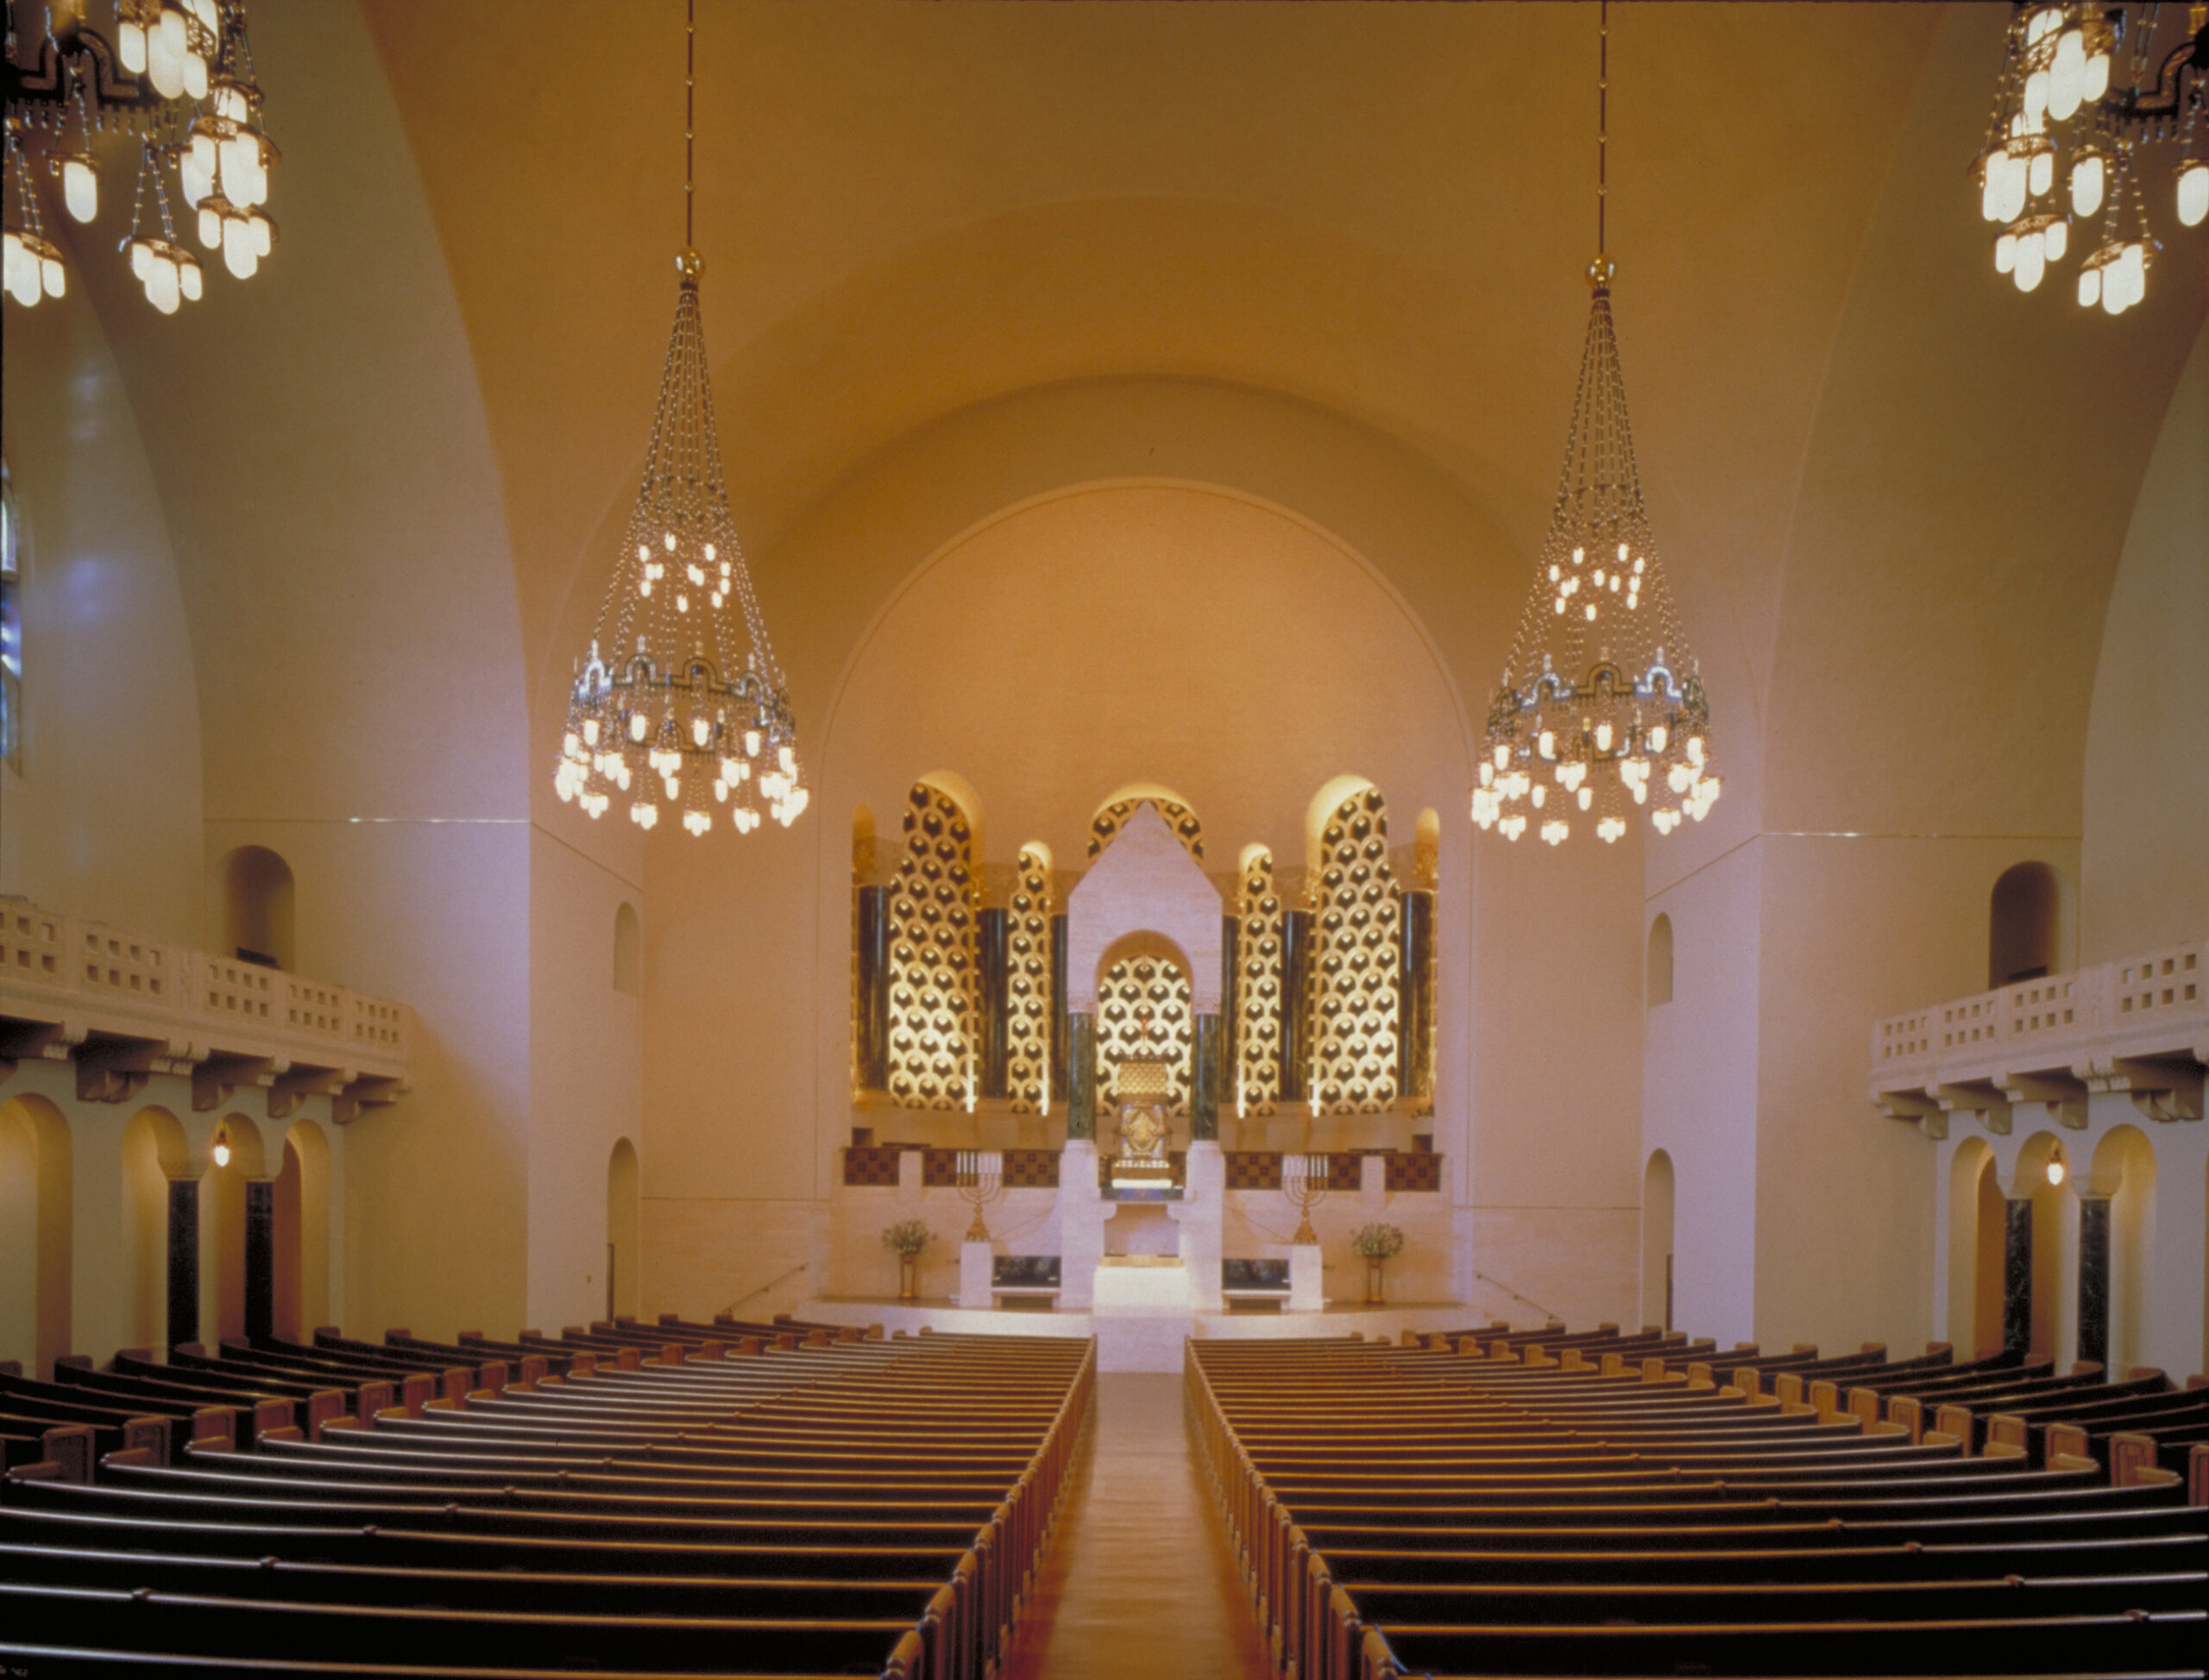 Lighting for the historic main sanctuary was completely renovated using both architectural and theatrical lighting techniques. A ceiling oculus was added to light the bimah and provide adequate light for the congregation. Temple Emanu-El, San Francisco, California © Chas McGrath